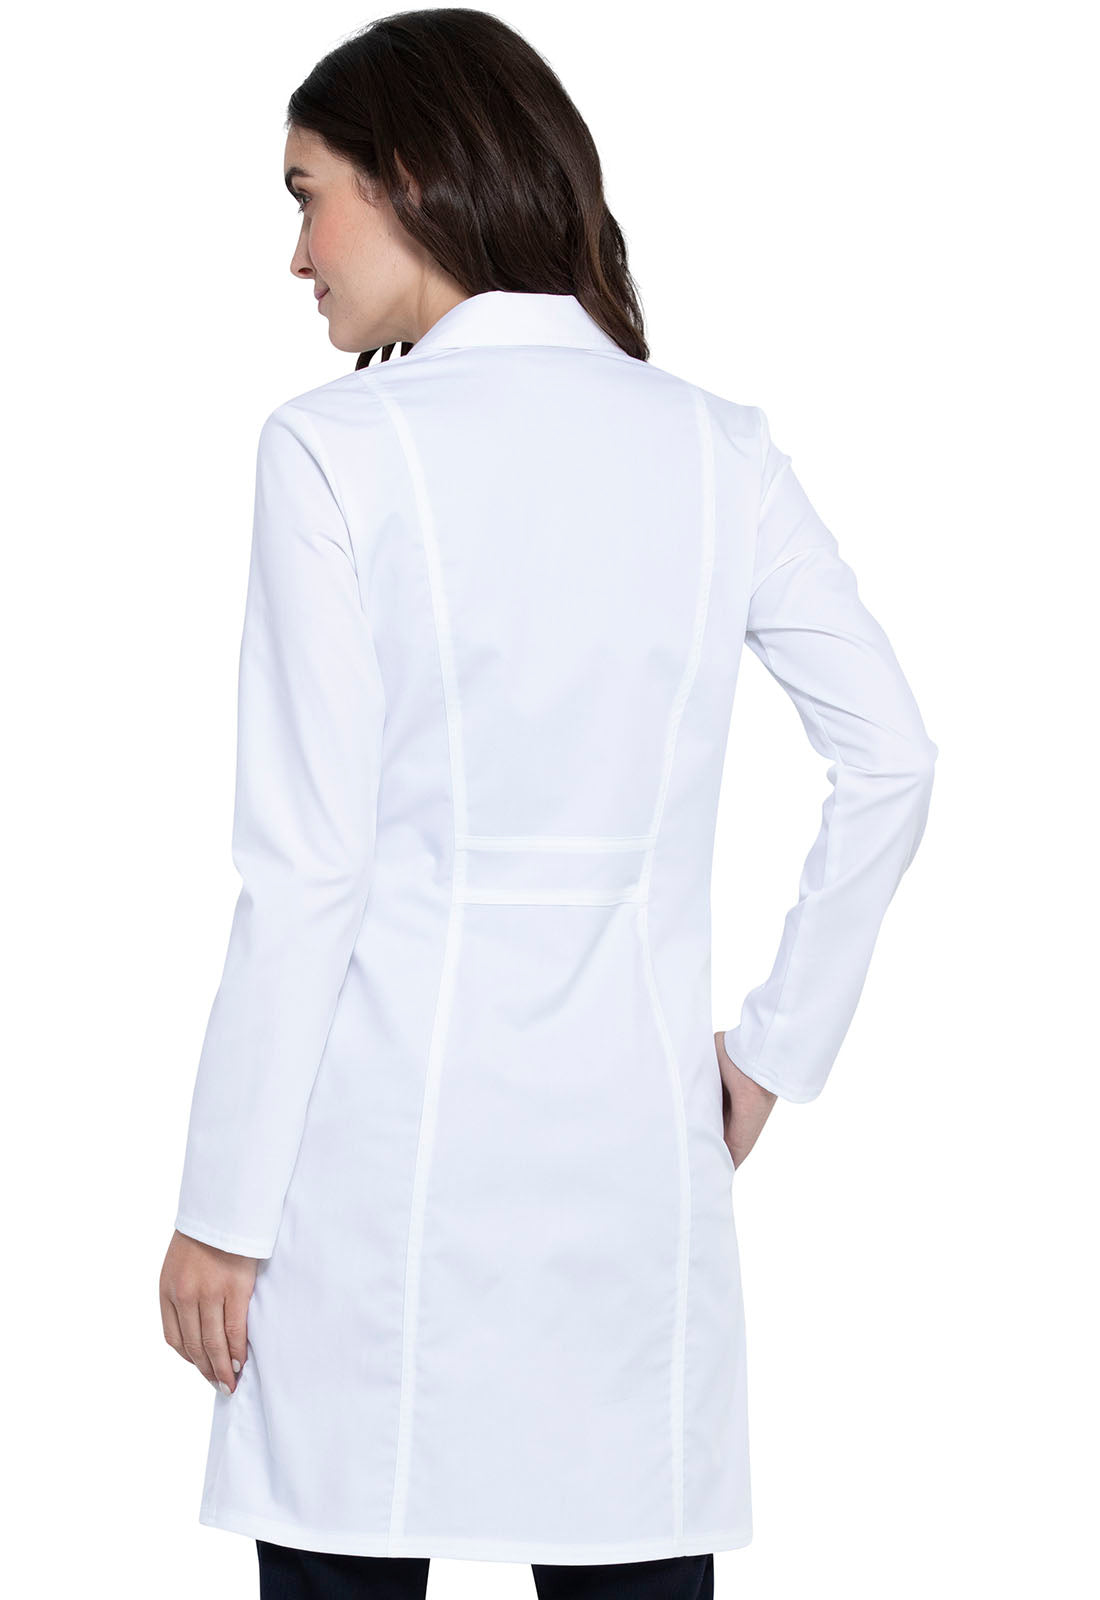 Women's 36" Lab Coat - Antimicrobial with Fluid Barrier Women's Lab Coat Cherokee Workwear   